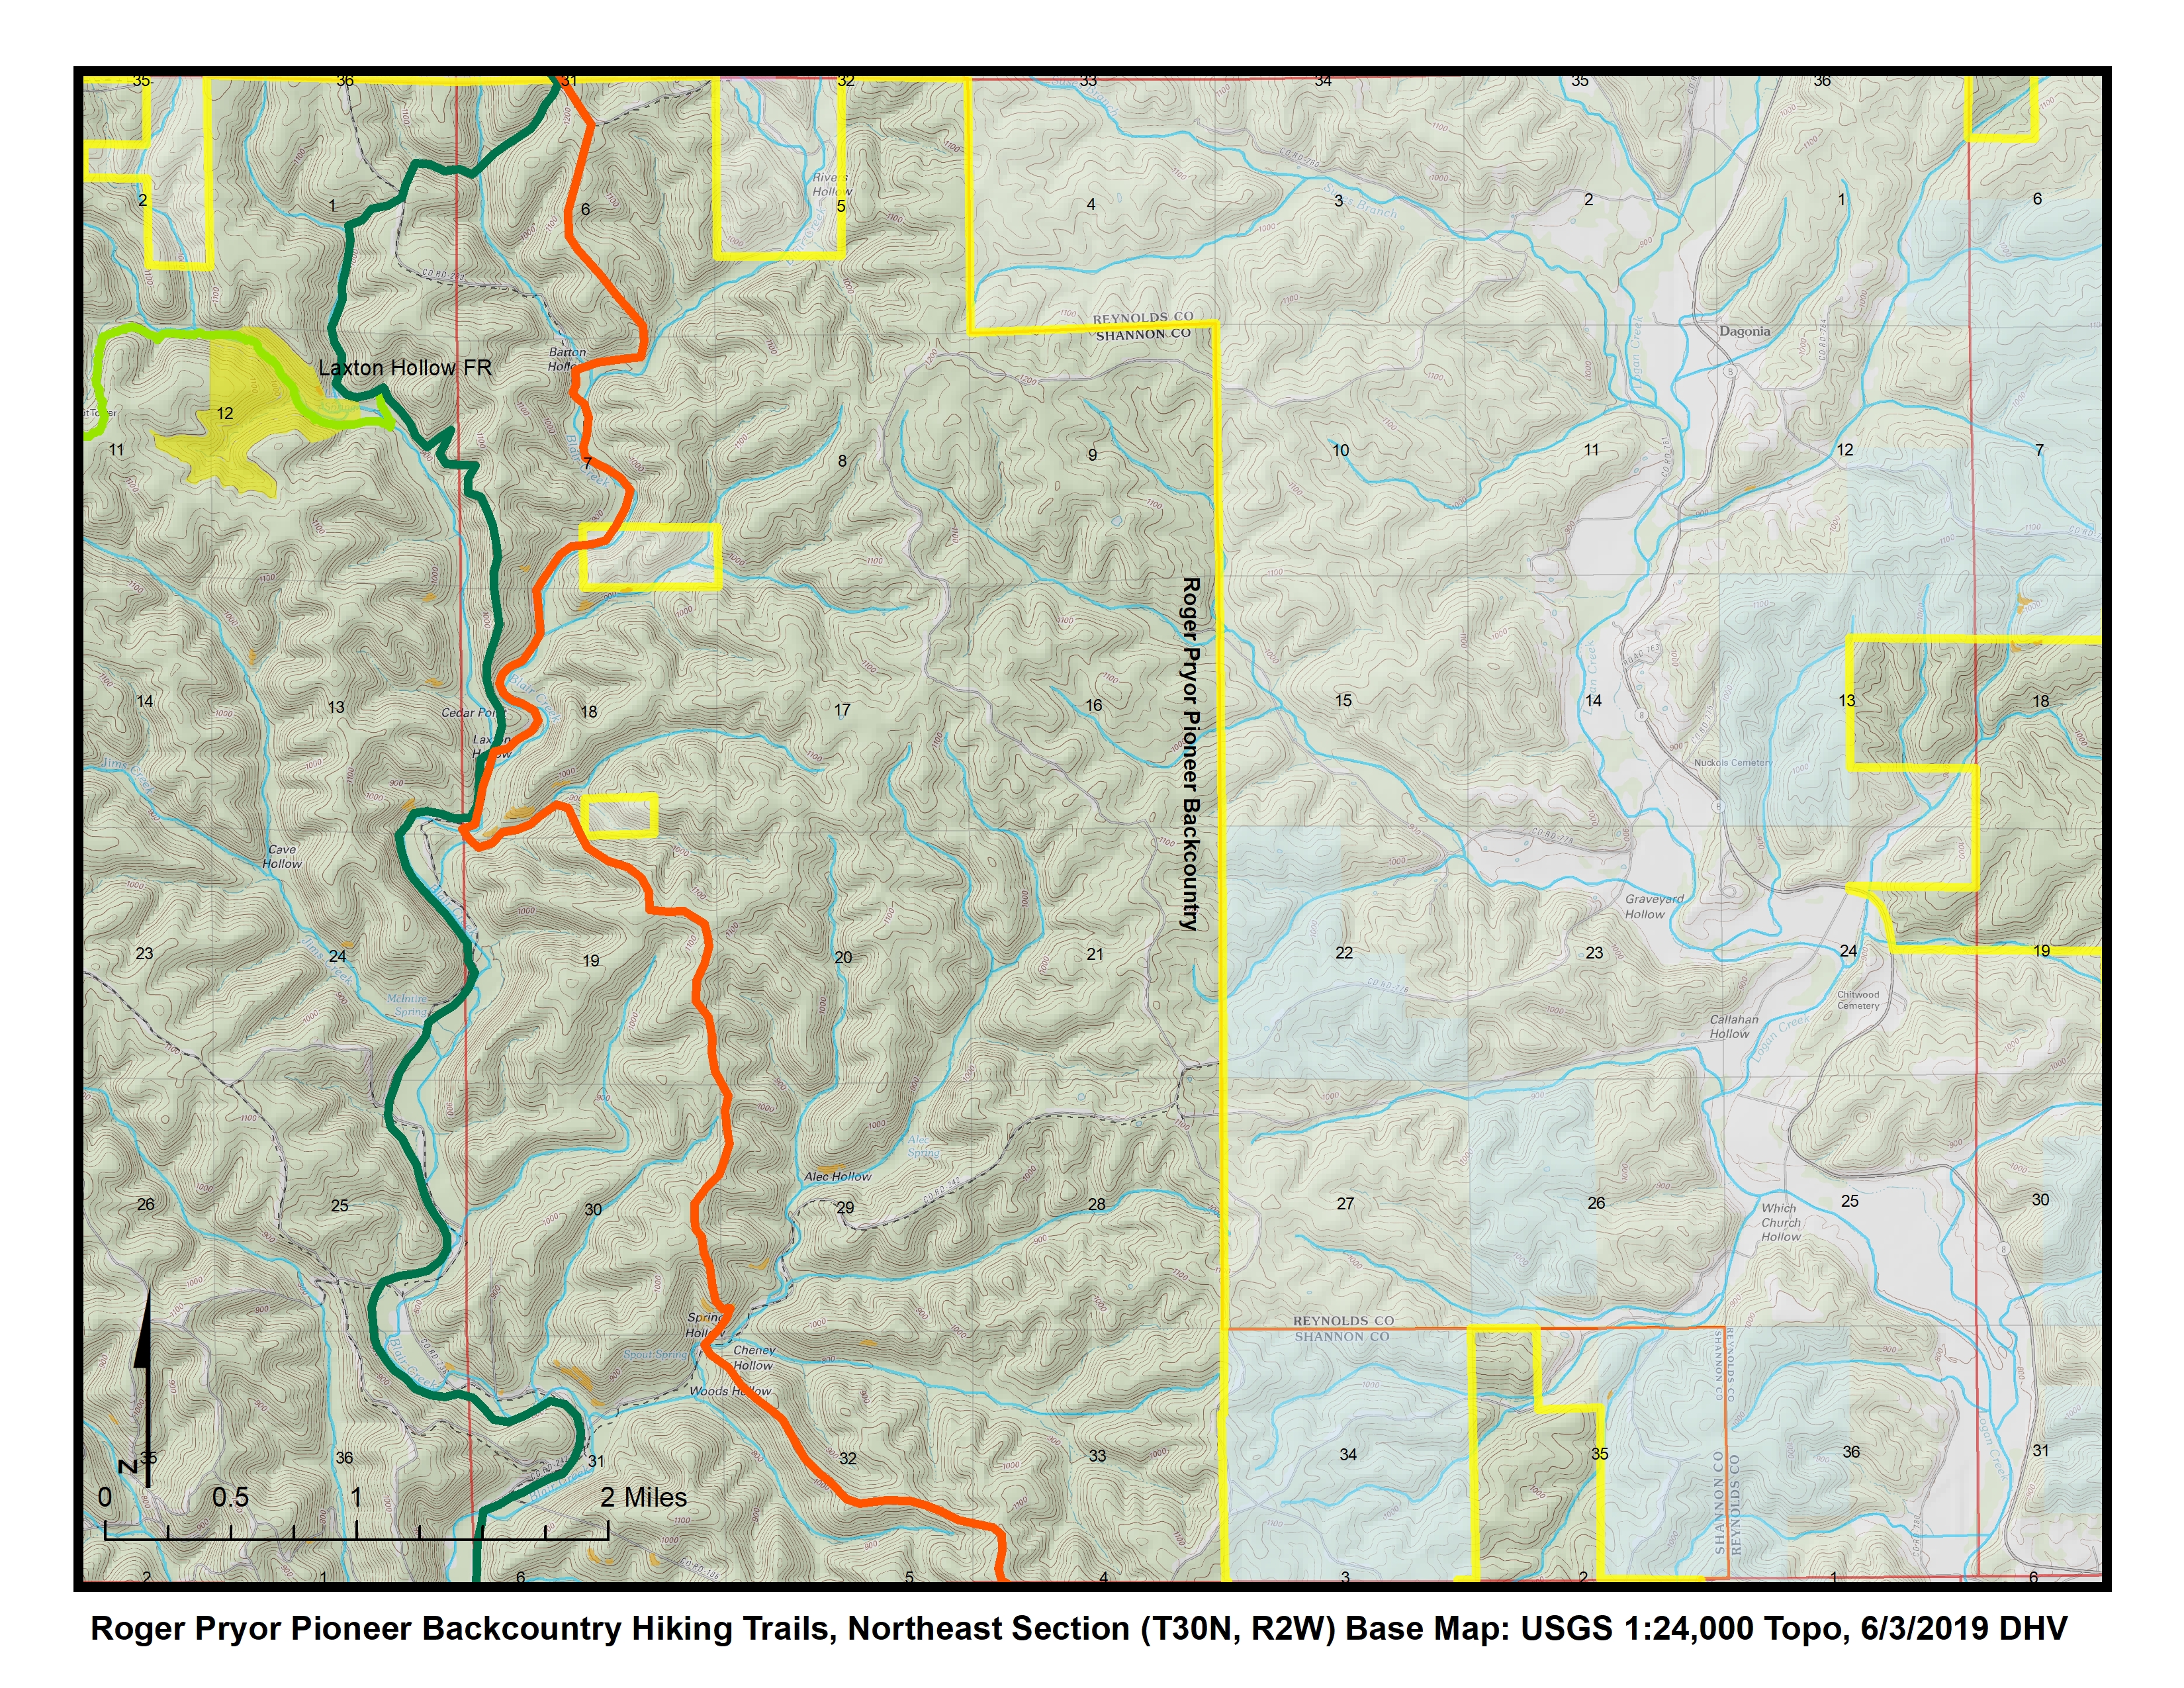 Map of northeast portion of Pioneer Backcountry trails